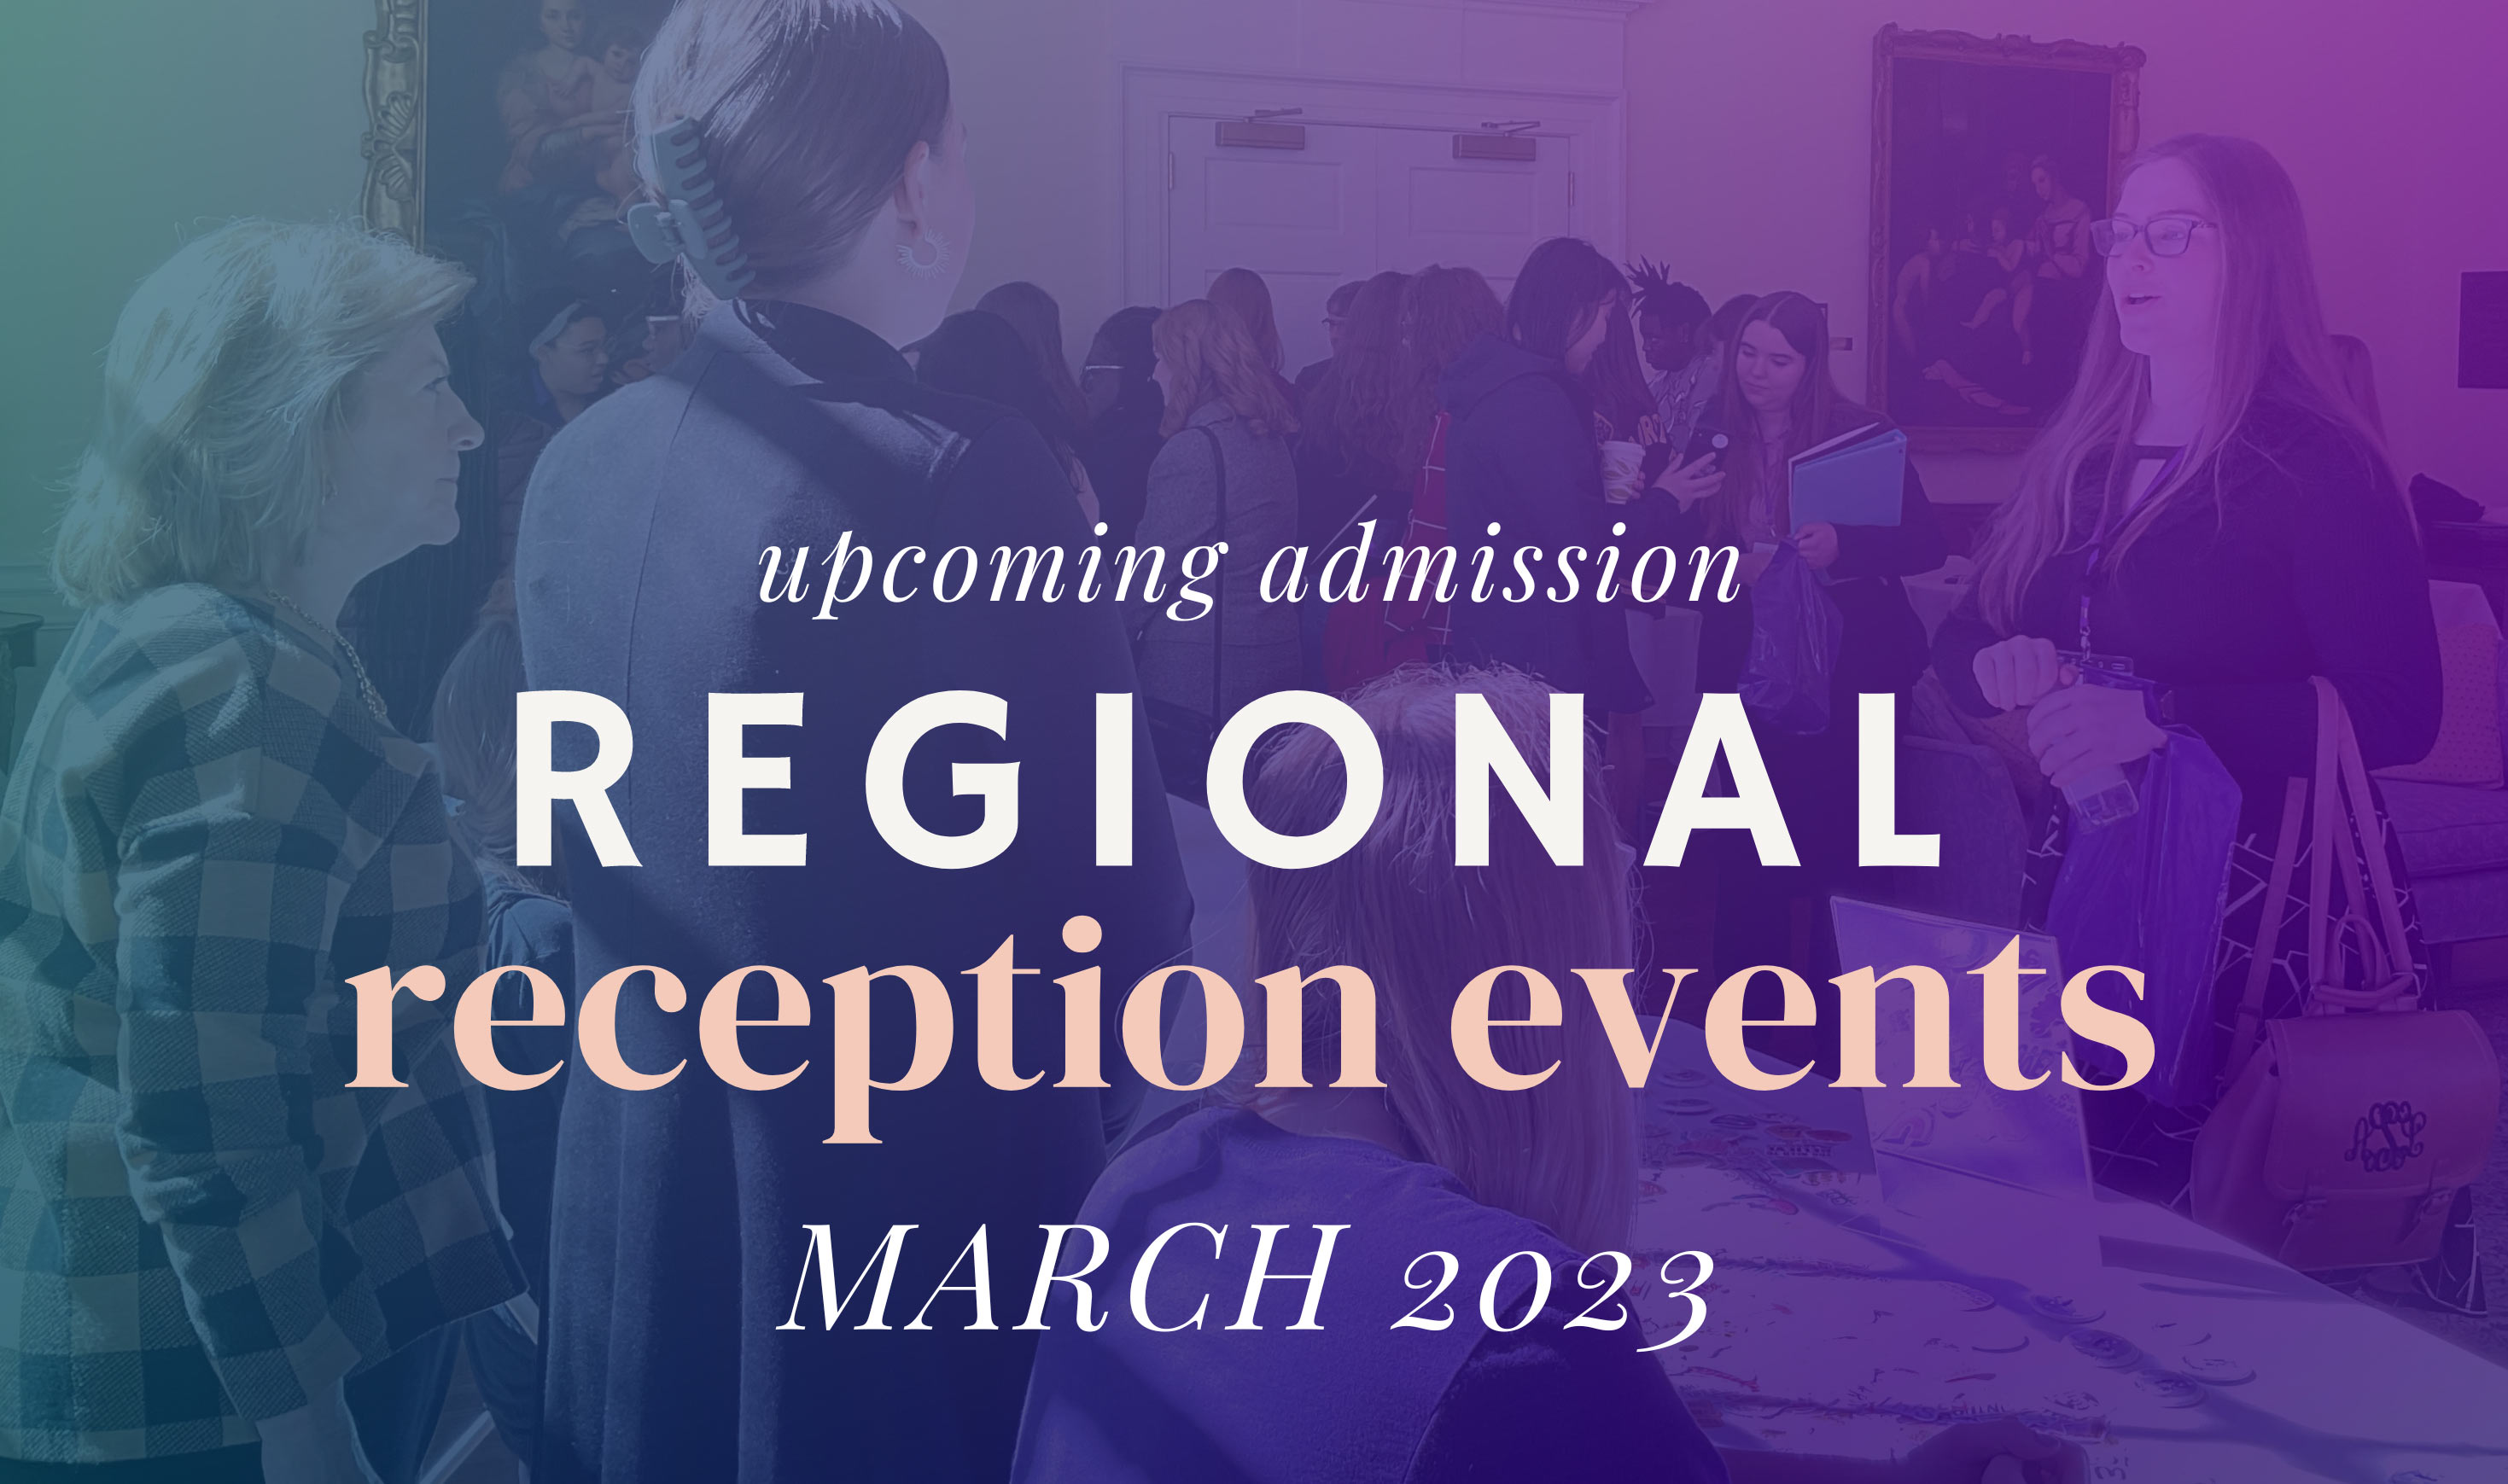 Regional reception events March 2023